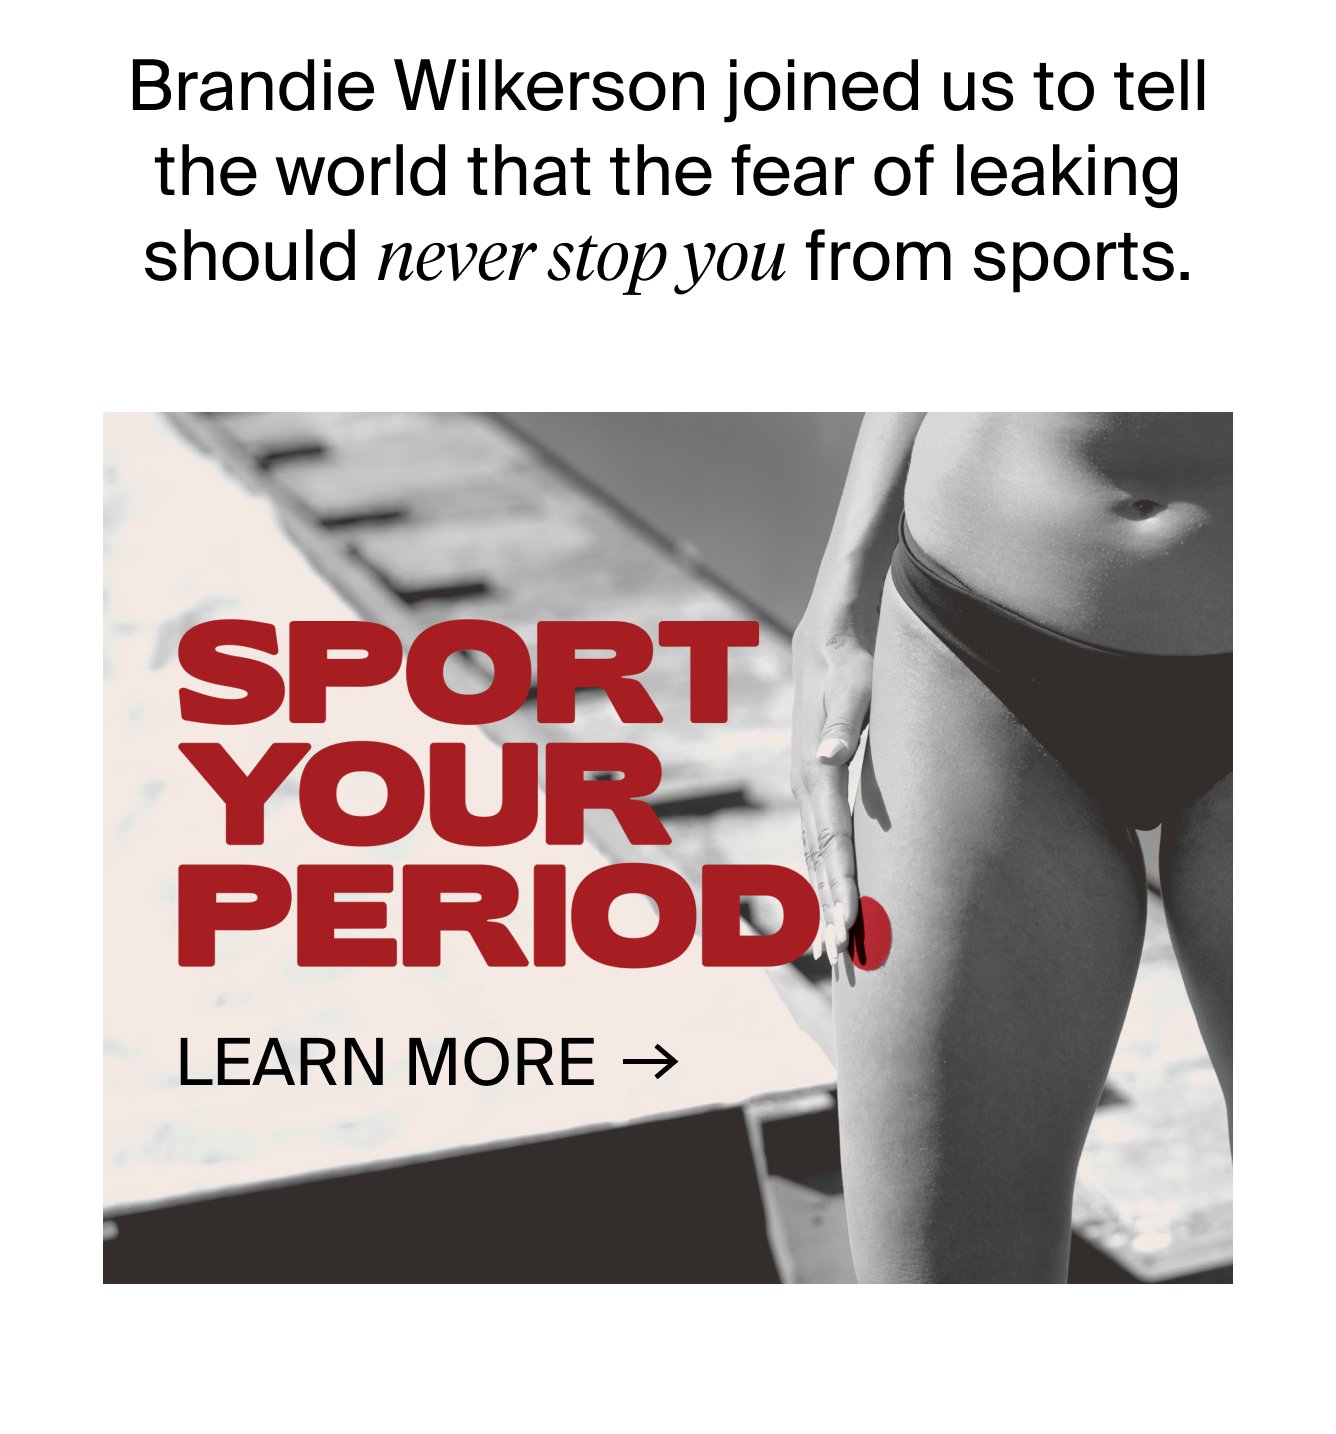 Brandie Wilkerson joined us to tell the world that the fear of leaking should never stop you from sports. SPORT YOU PERIOD. LEARN MORE.